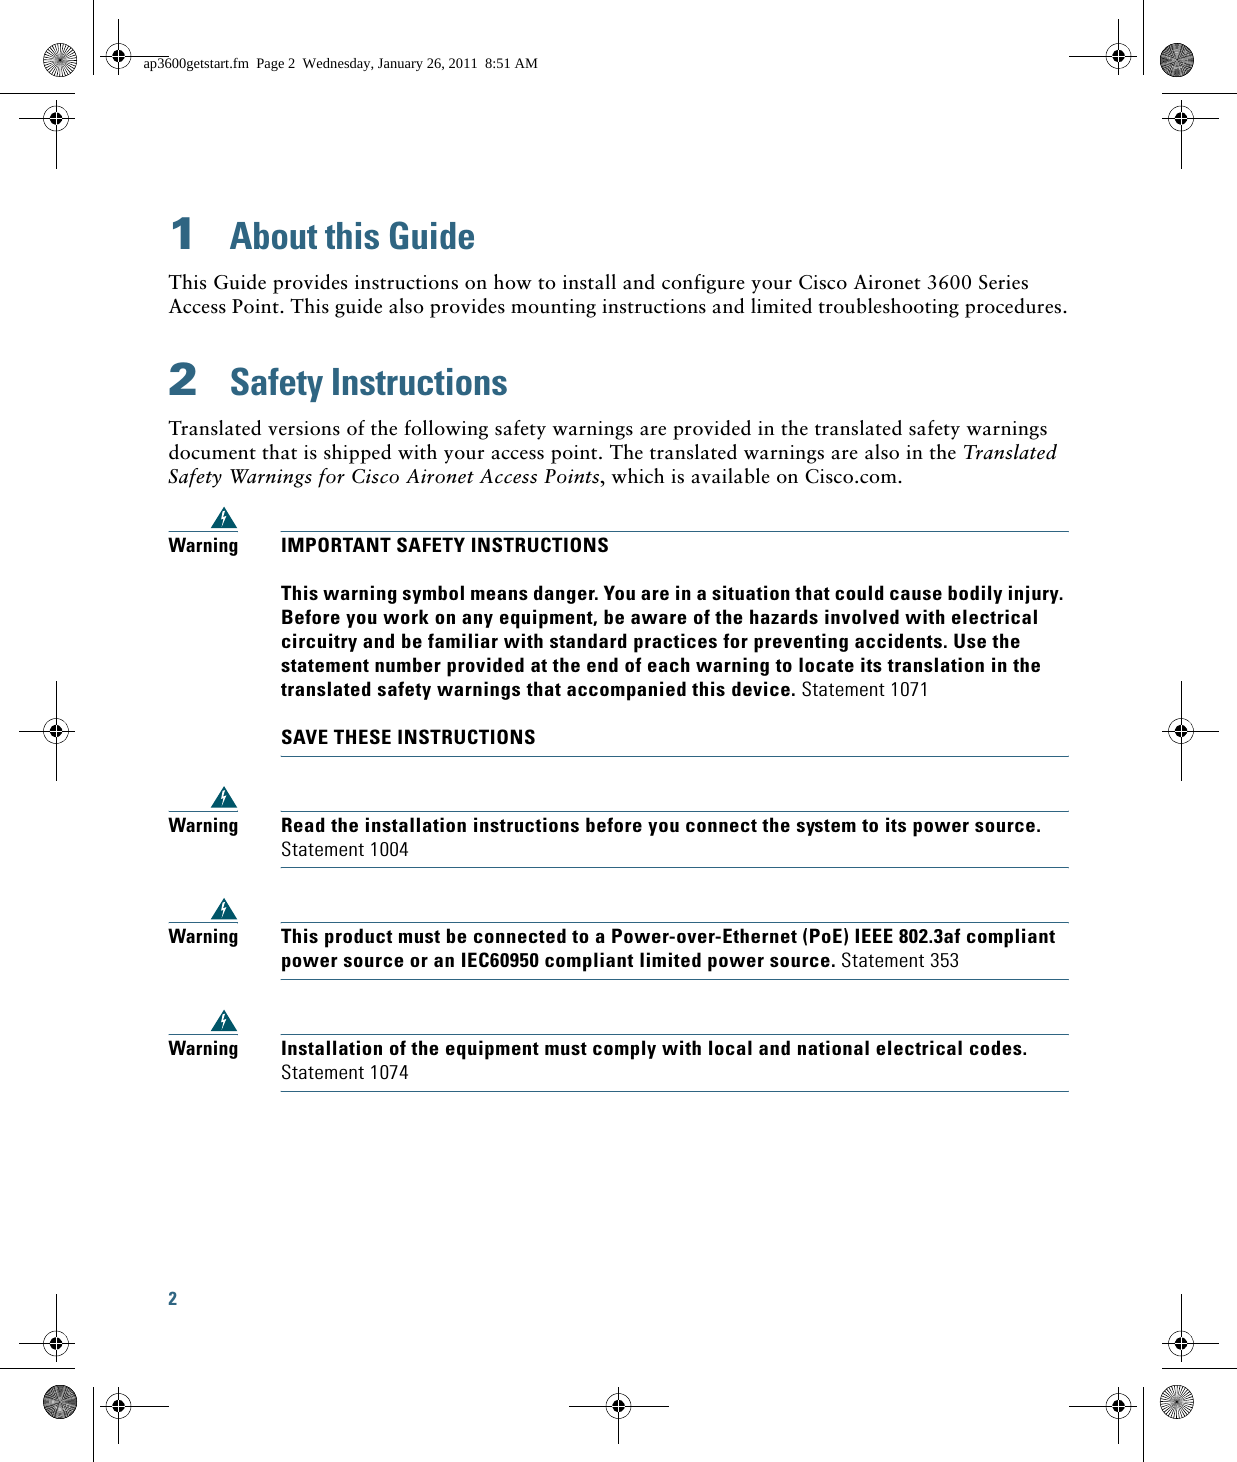 2 1  About this GuideThis Guide provides instructions on how to install and configure your Cisco Aironet 3600 Series Access Point. This guide also provides mounting instructions and limited troubleshooting procedures.2  Safety InstructionsTranslated versions of the following safety warnings are provided in the translated safety warnings document that is shipped with your access point. The translated warnings are also in the Translated Safety Warnings for Cisco Aironet Access Points, which is available on Cisco.com.WarningIMPORTANT SAFETY INSTRUCTIONS  This warning symbol means danger. You are in a situation that could cause bodily injury. Before you work on any equipment, be aware of the hazards involved with electrical circuitry and be familiar with standard practices for preventing accidents. Use the statement number provided at the end of each warning to locate its translation in the translated safety warnings that accompanied this device. Statement 1071  SAVE THESE INSTRUCTIONSWarningRead the installation instructions before you connect the system to its power source. Statement 1004WarningThis product must be connected to a Power-over-Ethernet (PoE) IEEE 802.3af compliant power source or an IEC60950 compliant limited power source. Statement 353WarningInstallation of the equipment must comply with local and national electrical codes. Statement 1074ap3600getstart.fm  Page 2  Wednesday, January 26, 2011  8:51 AM